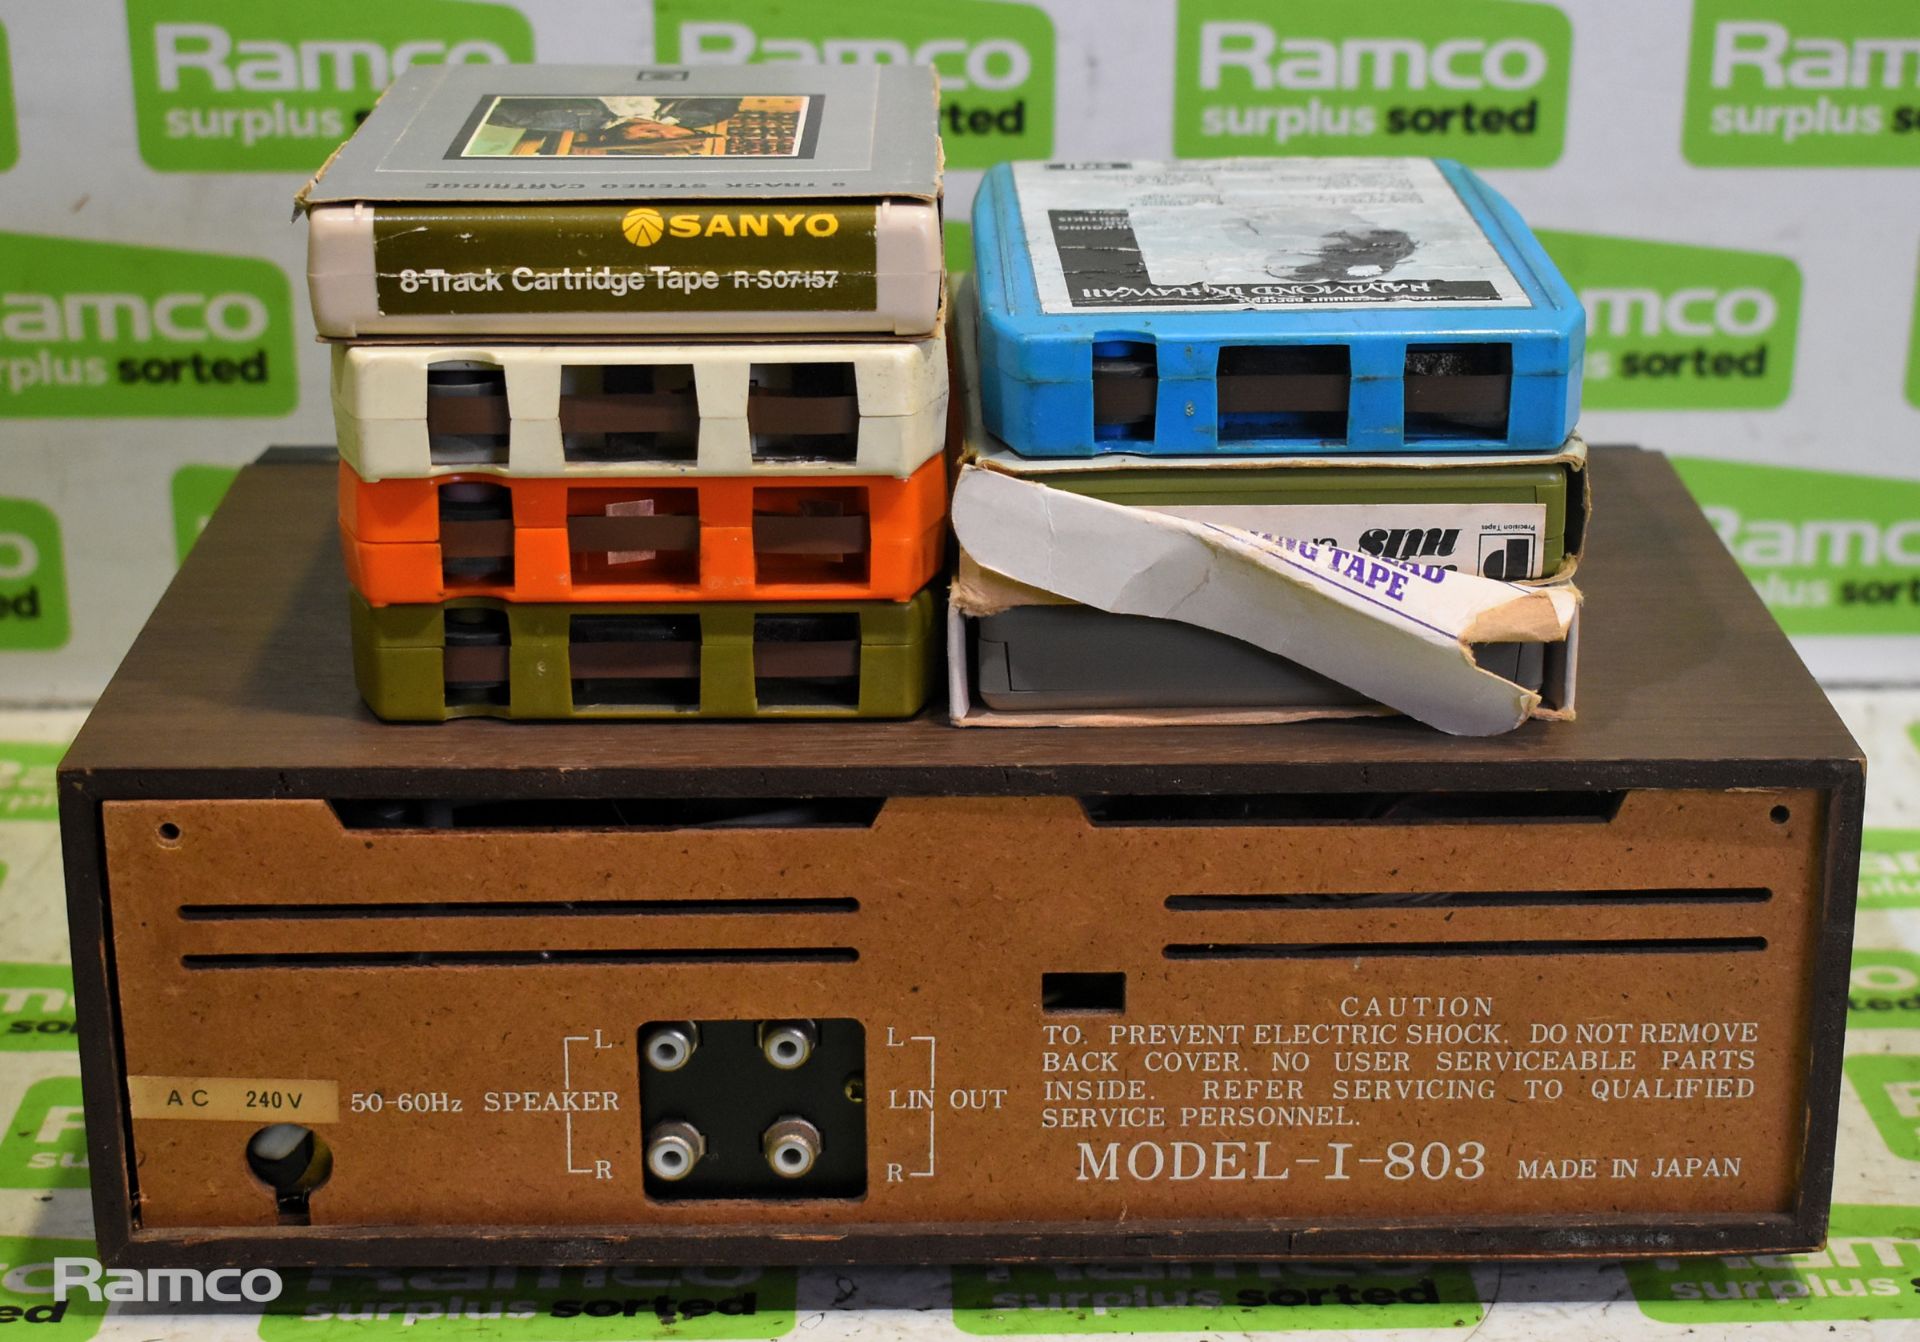 Model-I-803 8 track stereo tape player - Image 4 of 4